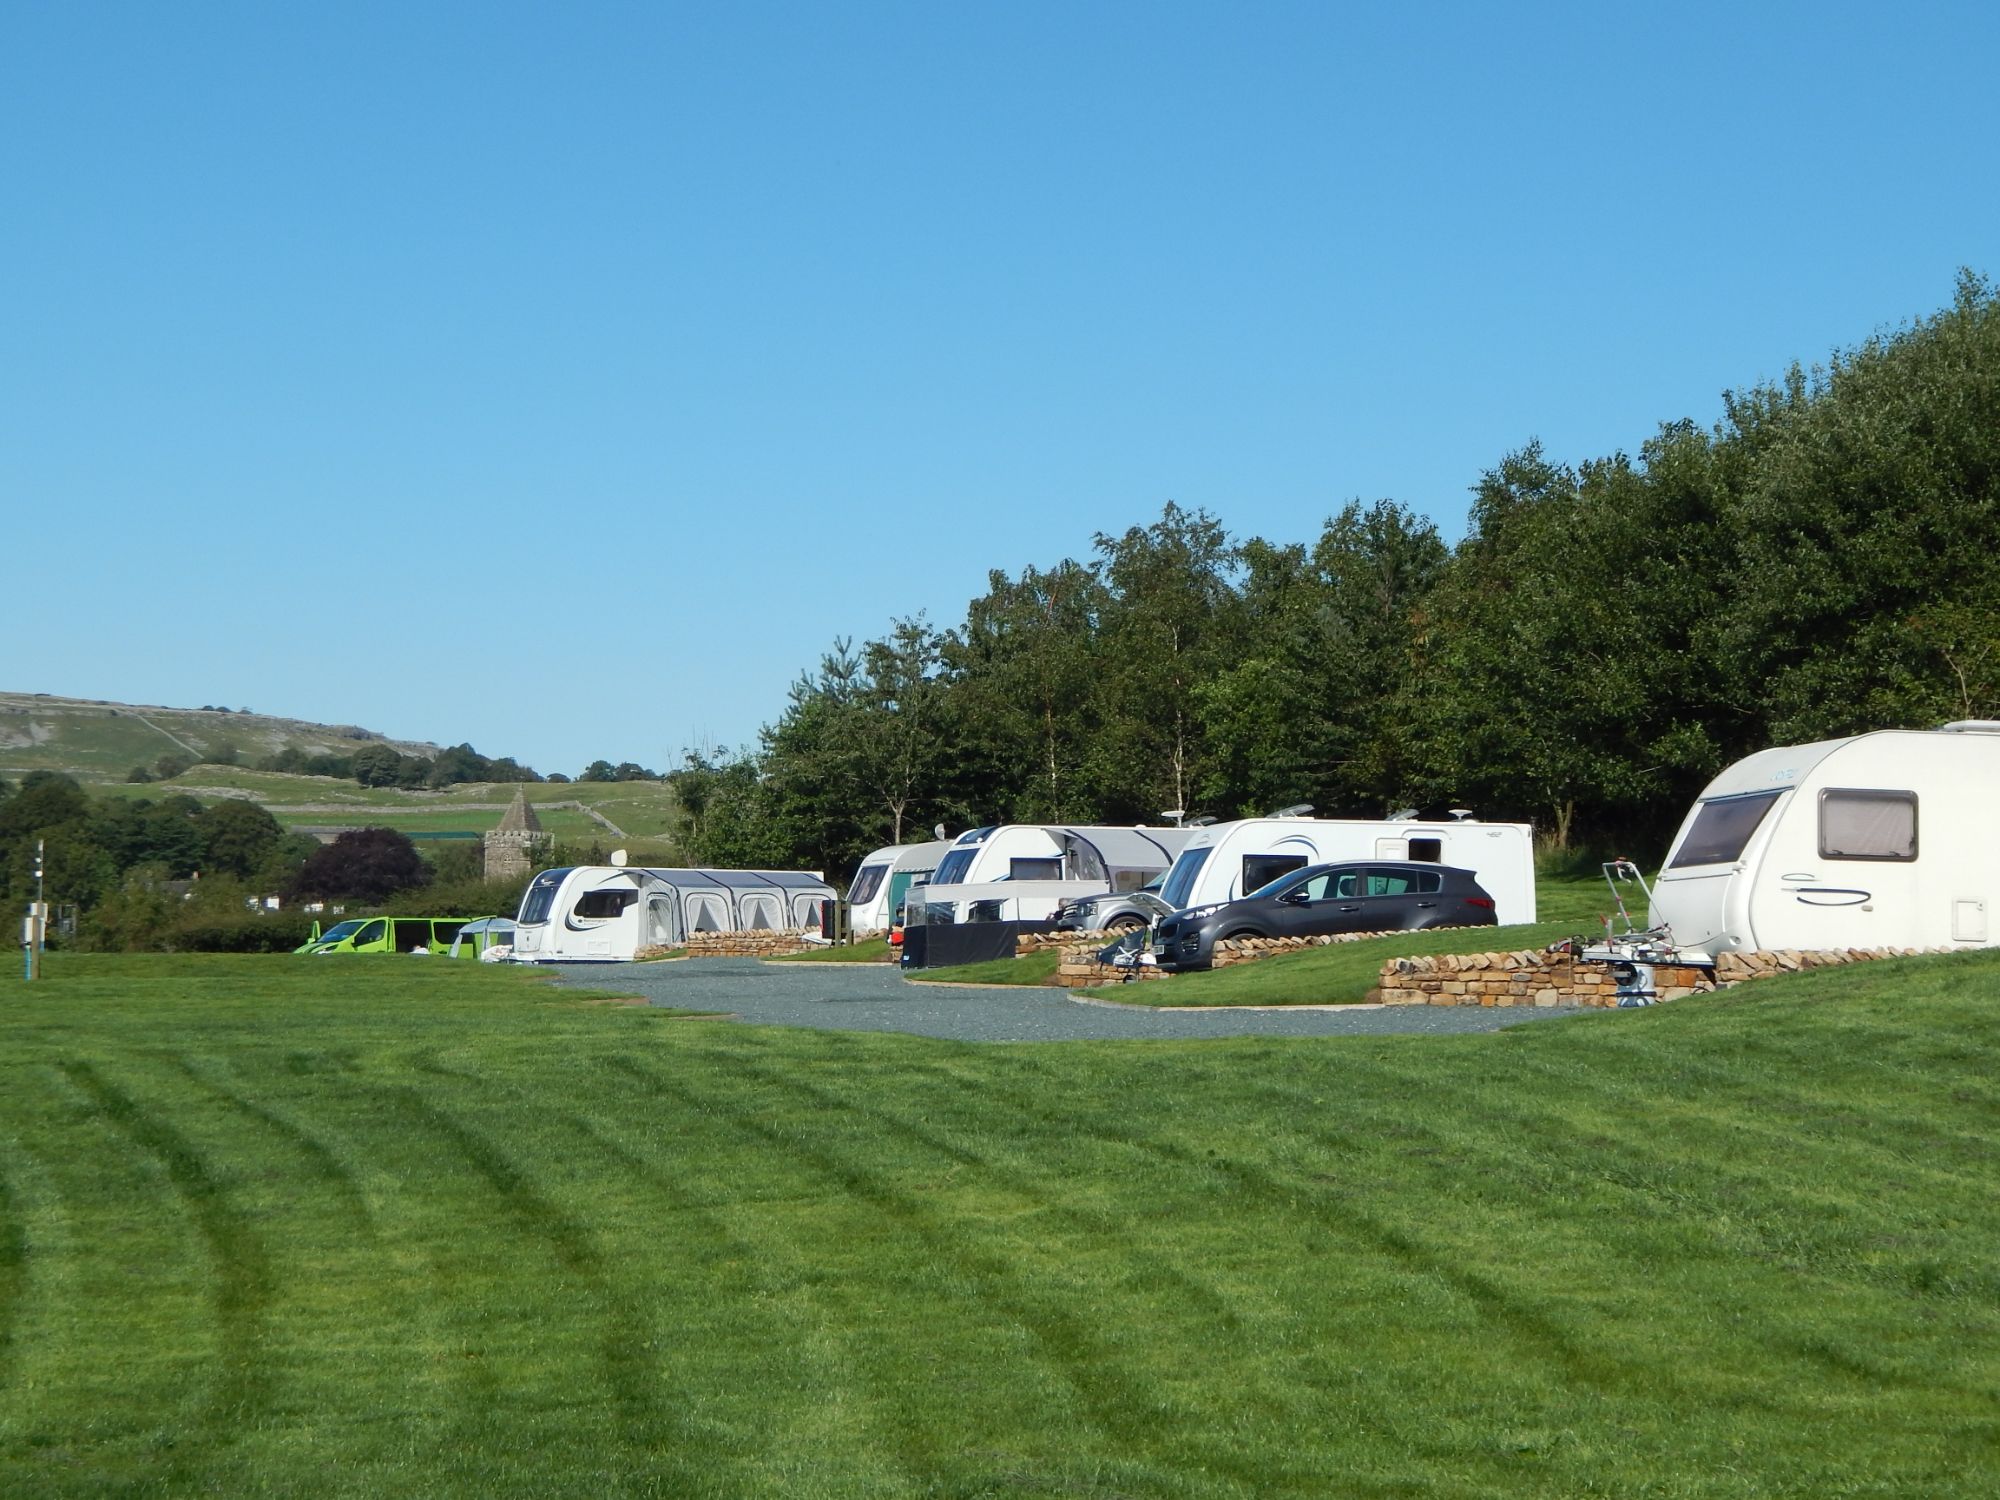 Some of the Serviced pitches